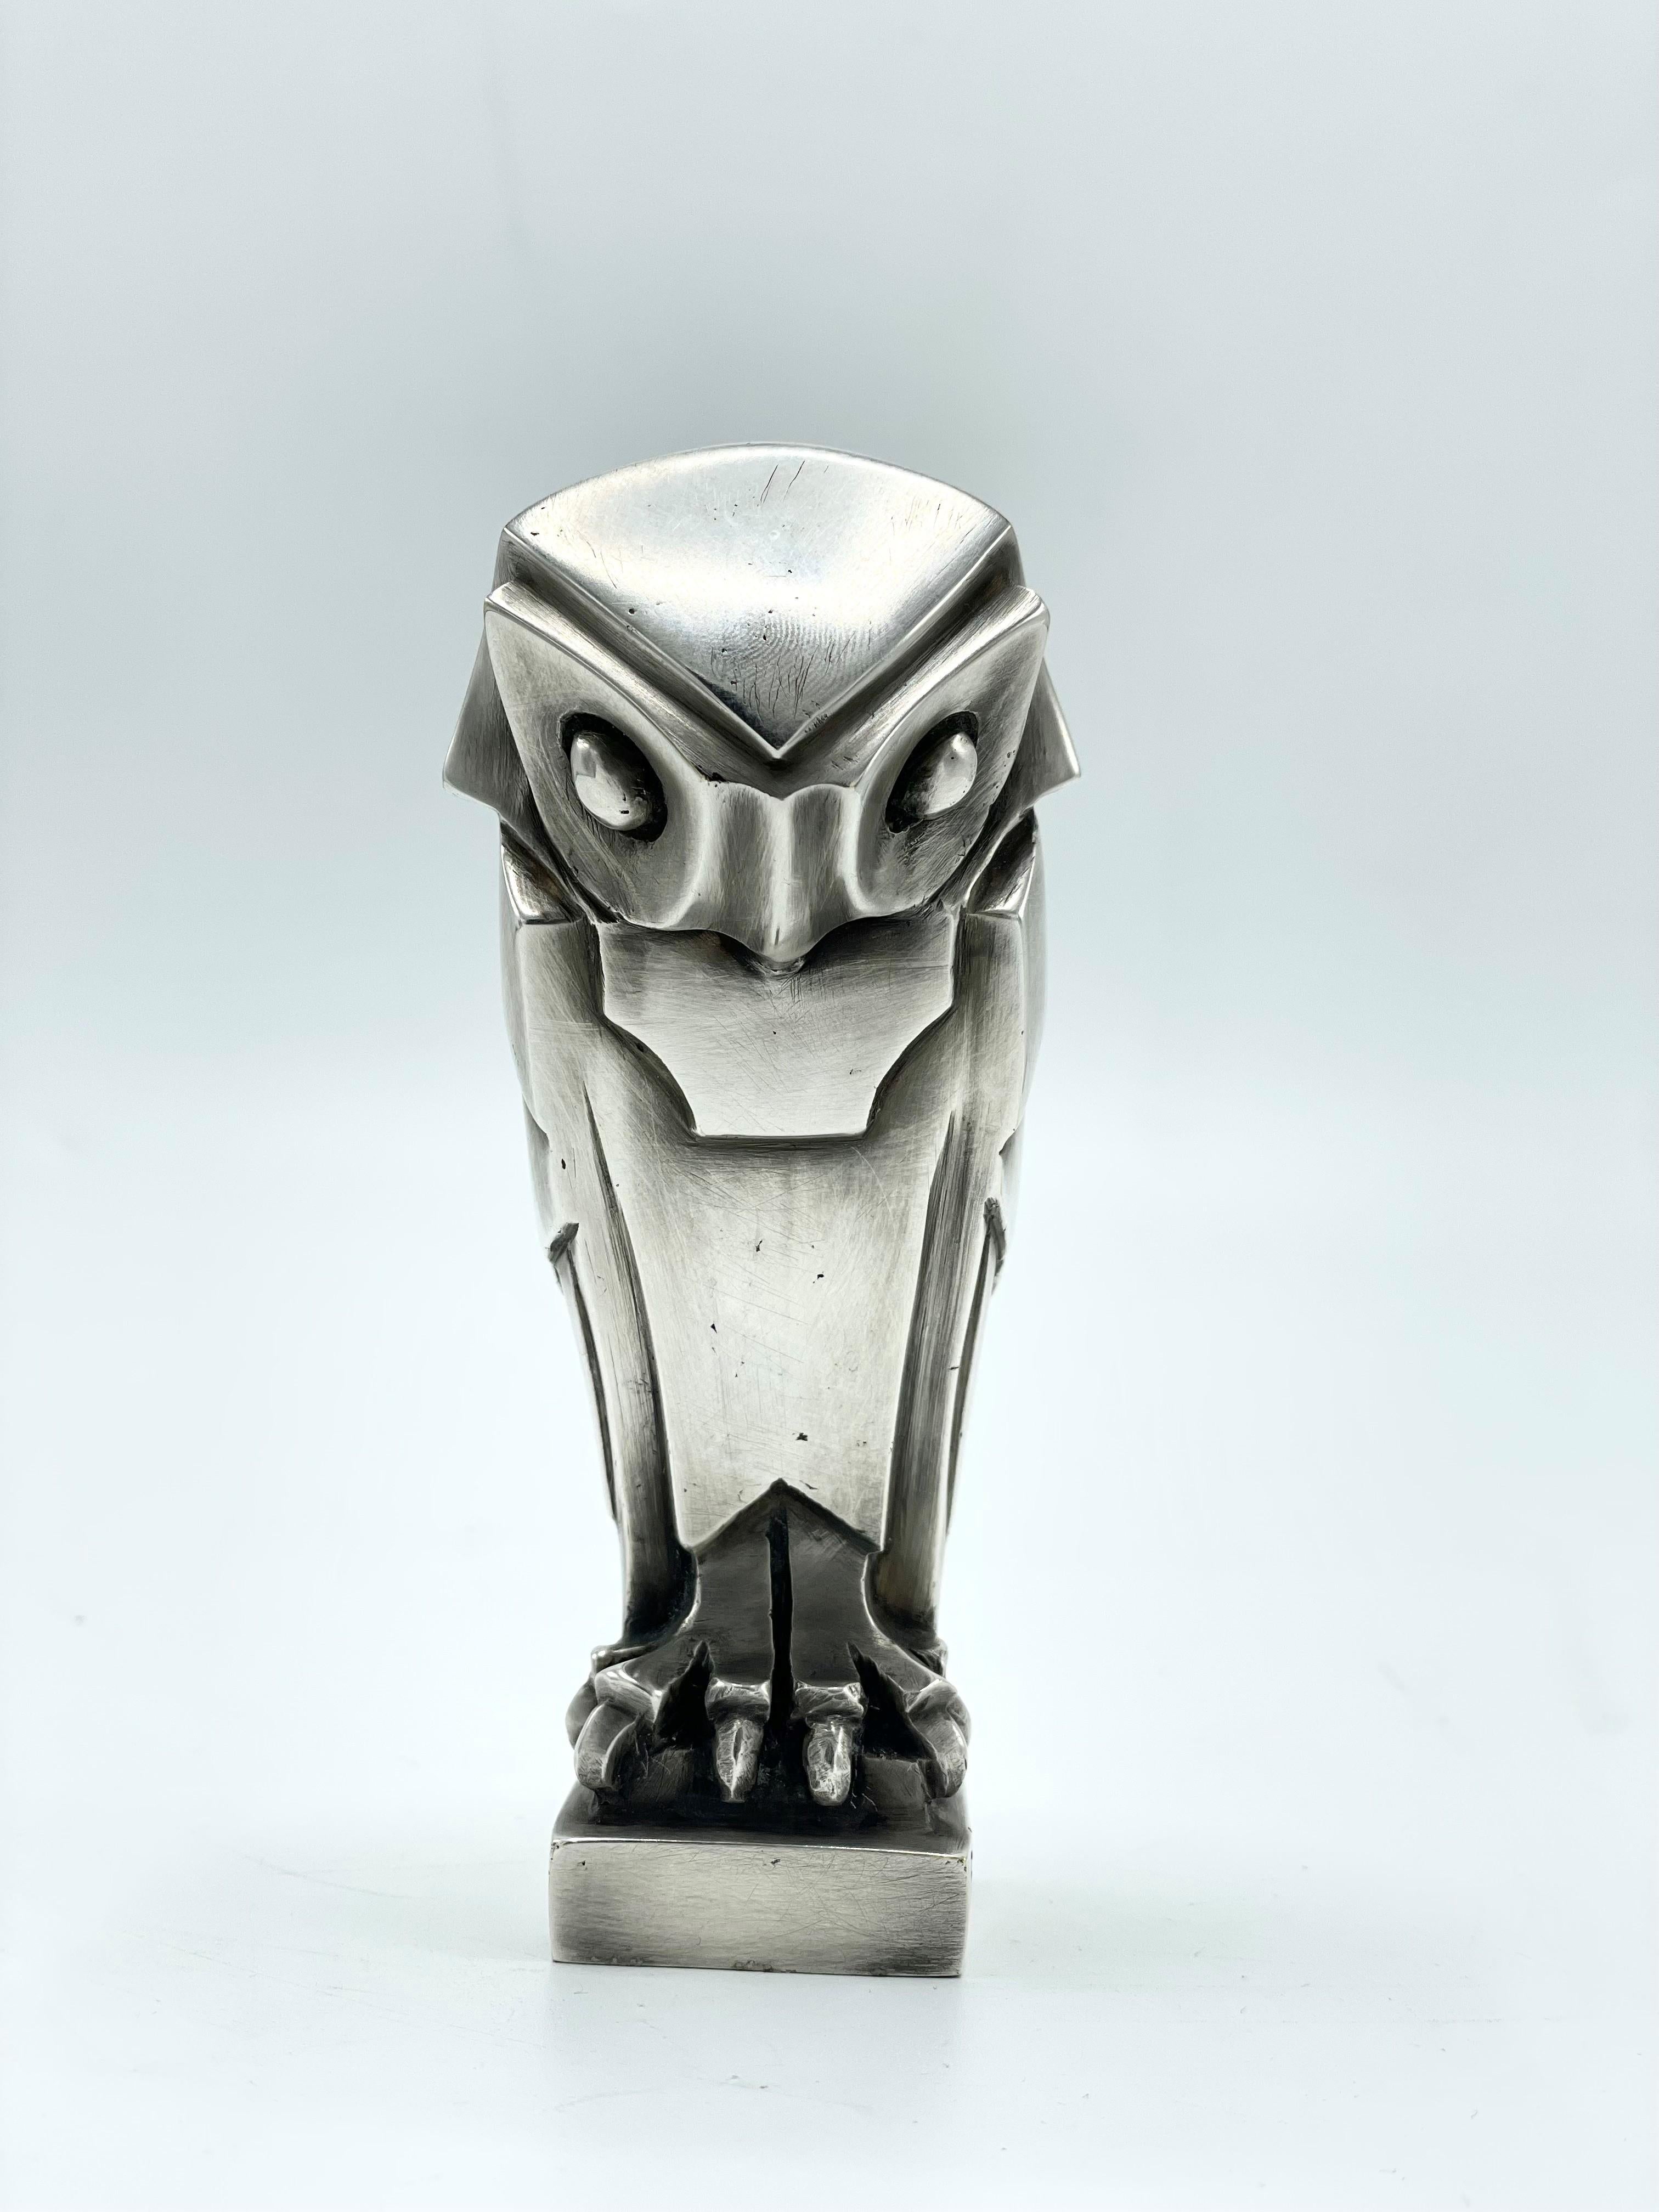 E´douard Marcel Sandoz (1881-1971) Owl - Hibou silver plated bronze car mascot, hood ornament. Also used as paperweight. Signed Sandoz and Susse Freres Foundry, Paris, circa 1920s. Very Nice looking.

Sandoz (1881-1971) is one of the foremost